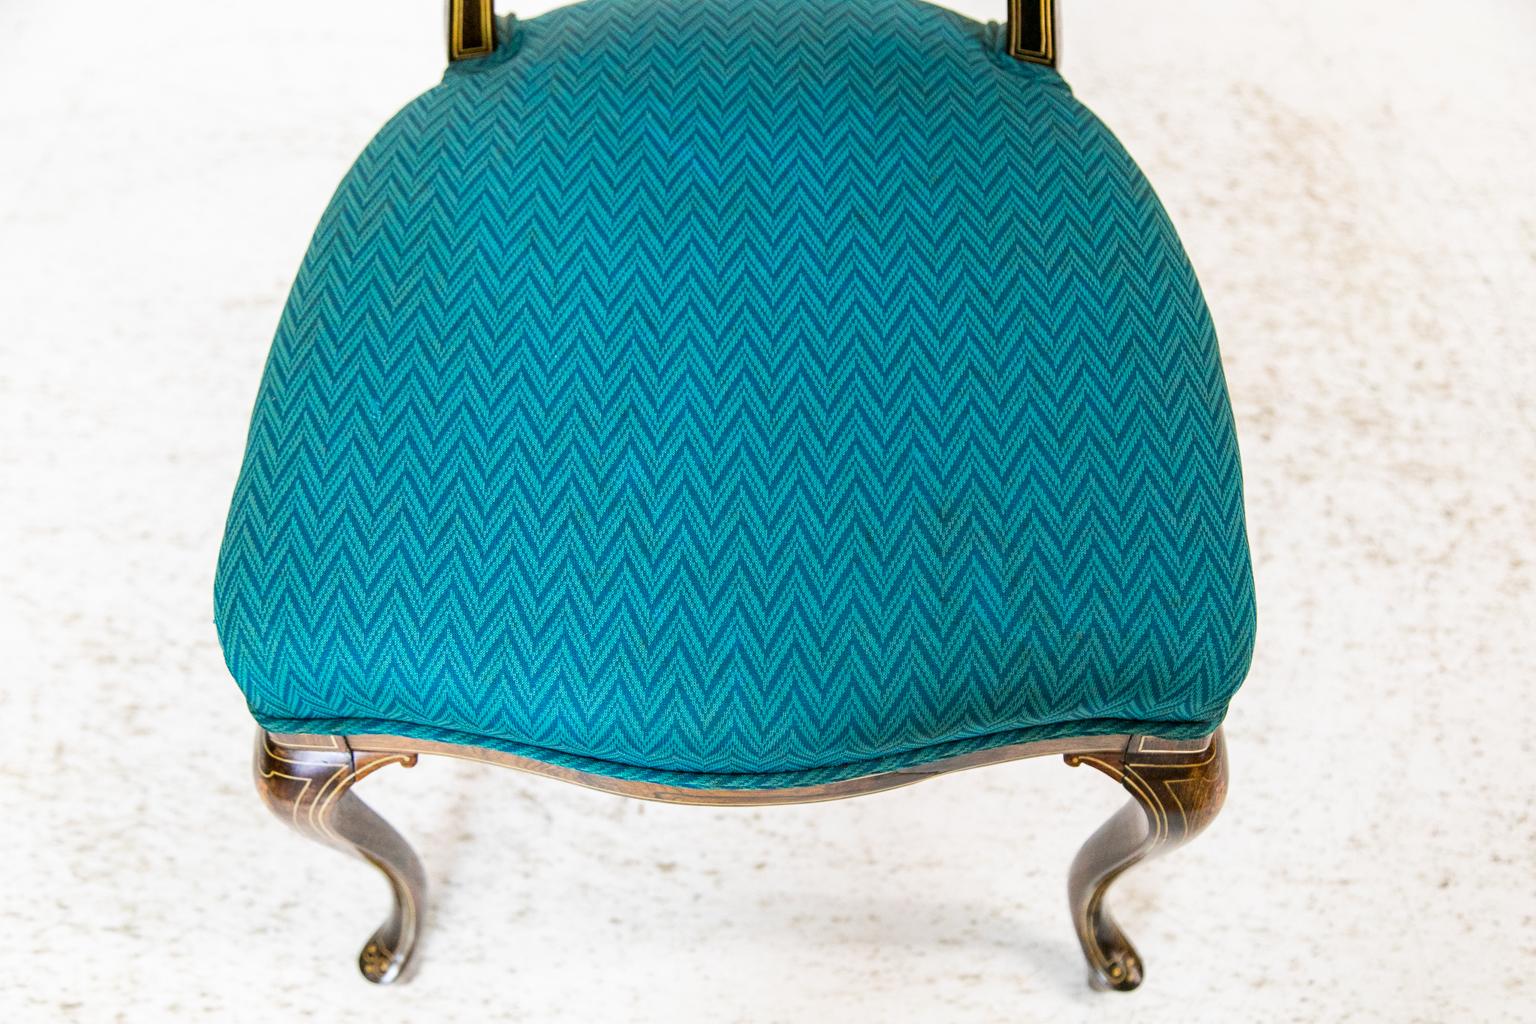 This French desk chair is made of rosewood and is inlaid with boxwood and simulated ivory using urns, flowers, arabesques, and bellflowers. The front of the seat has a serpentine shape. It has been recently reupholstered in a teal fabric.